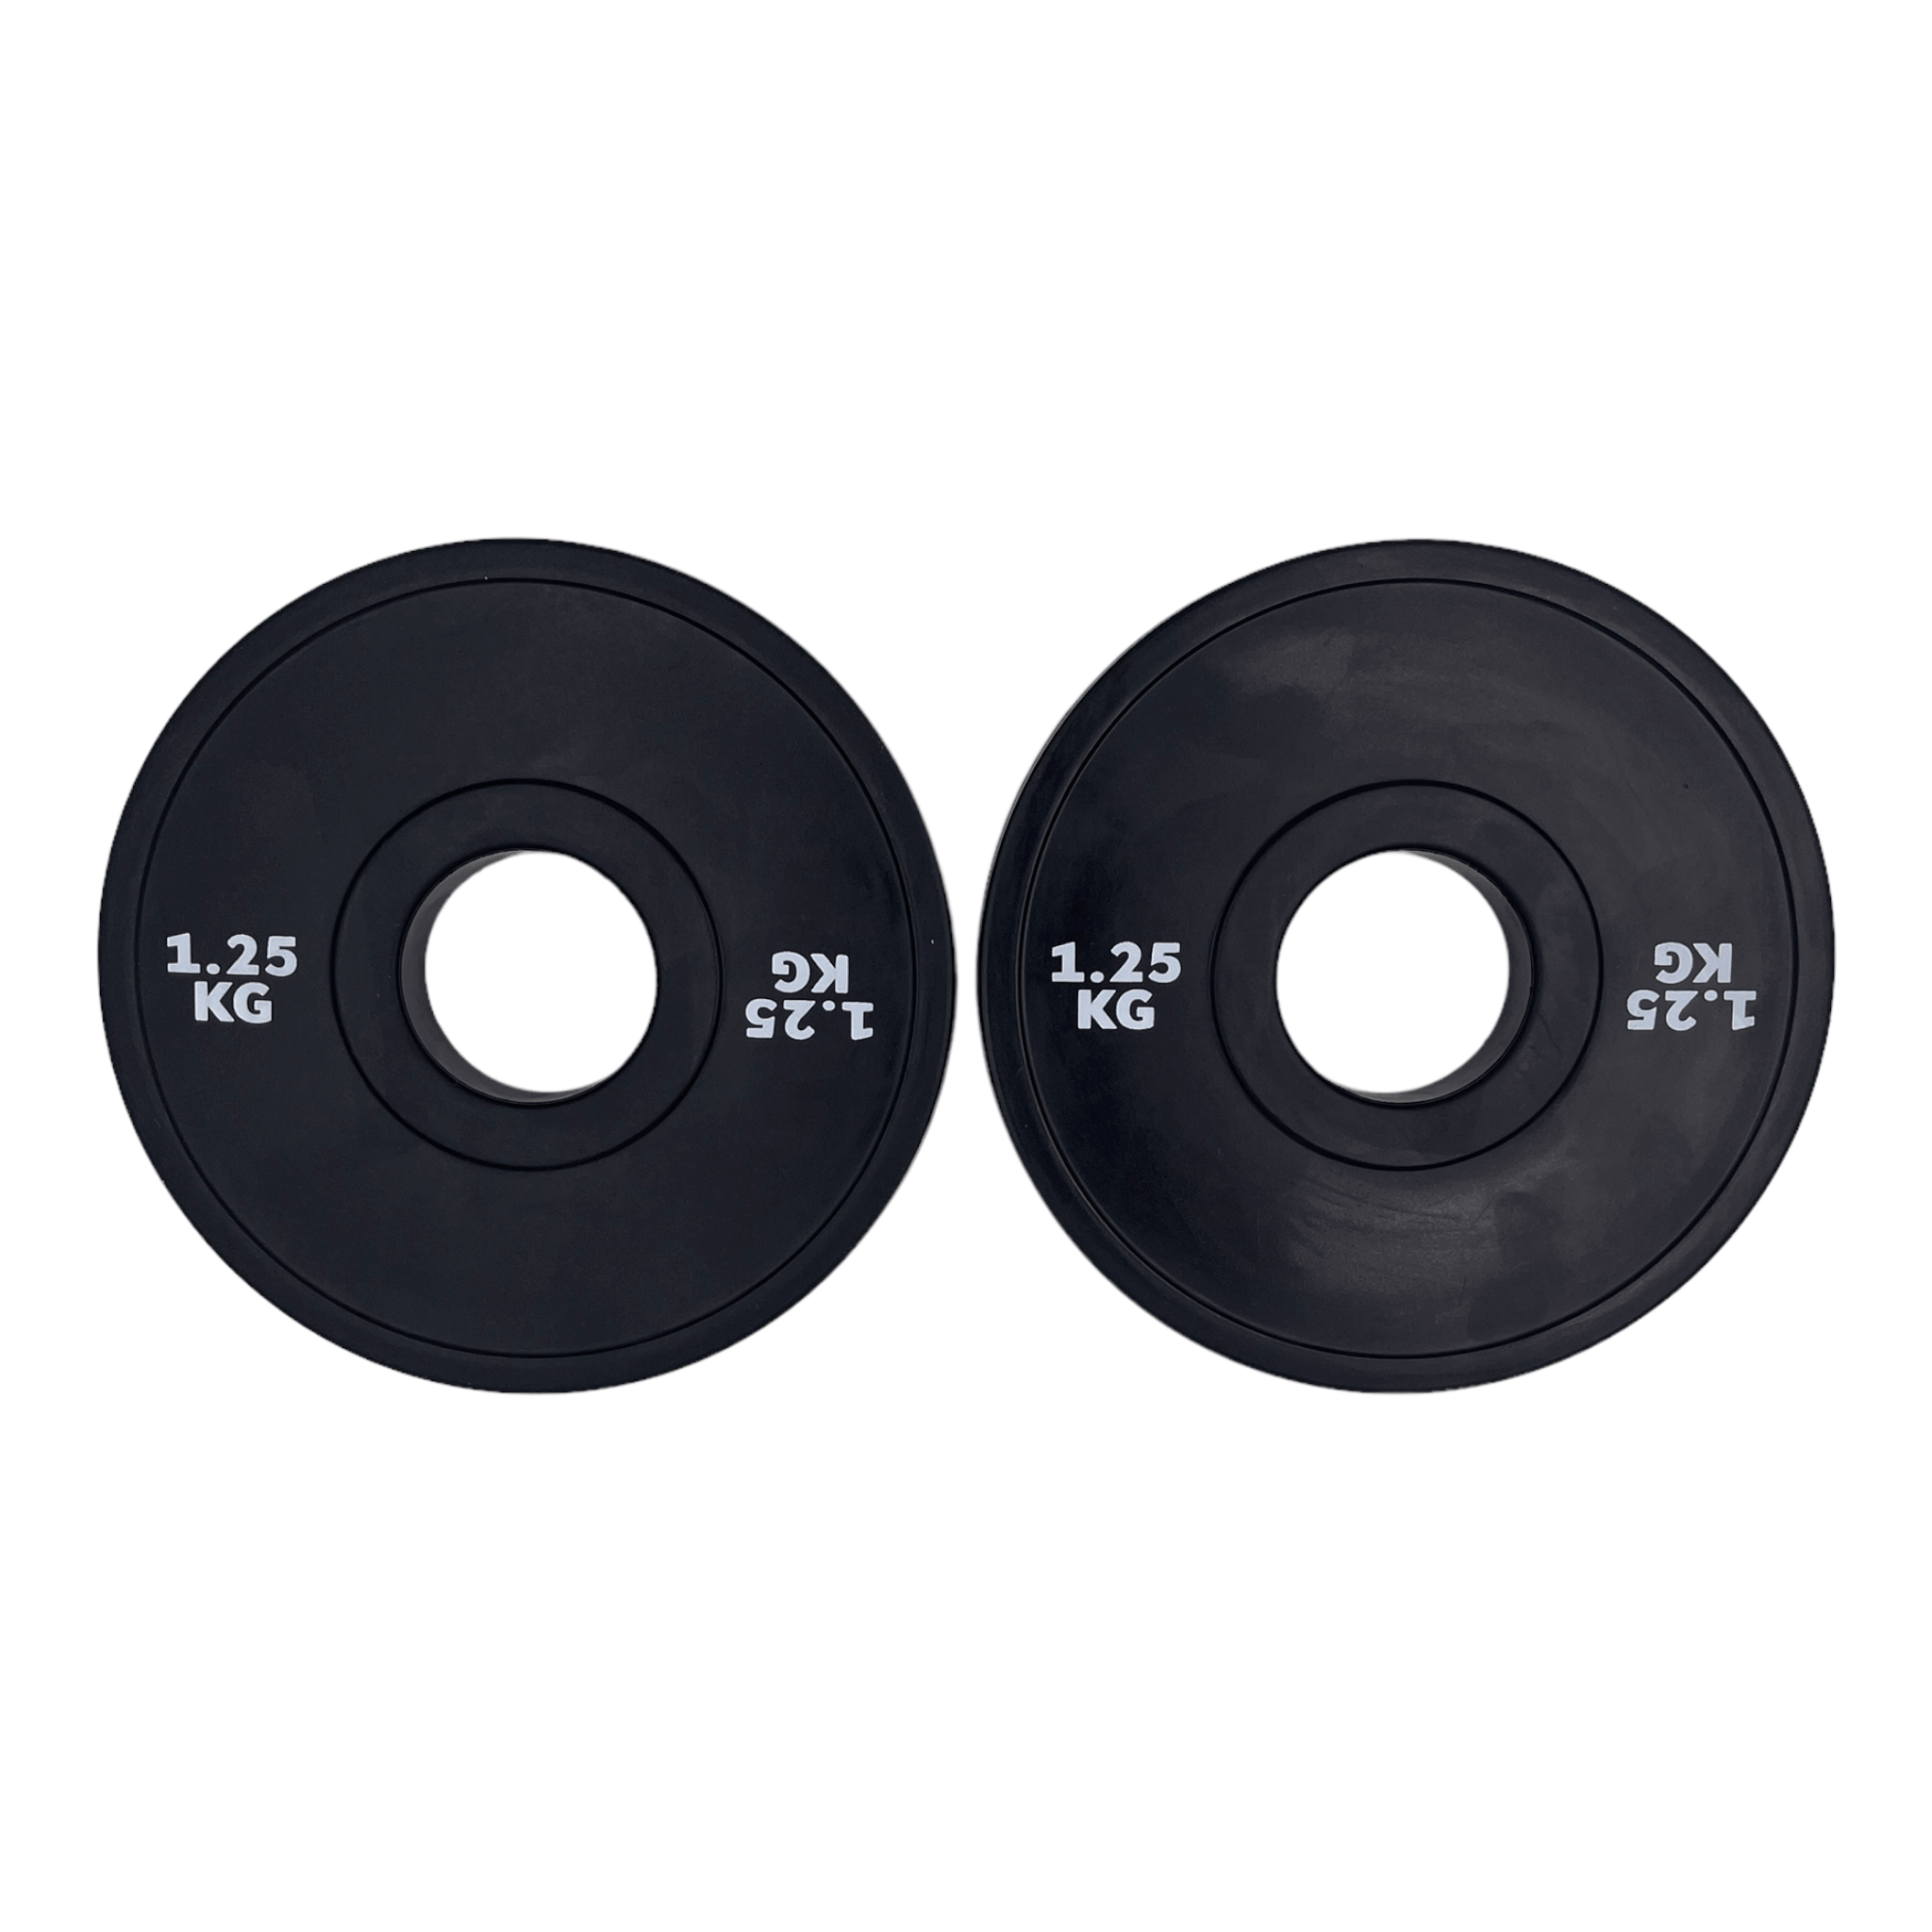 1.25kg Fractional Change Plates Rubber Weight Plates Pair | INSOURCE